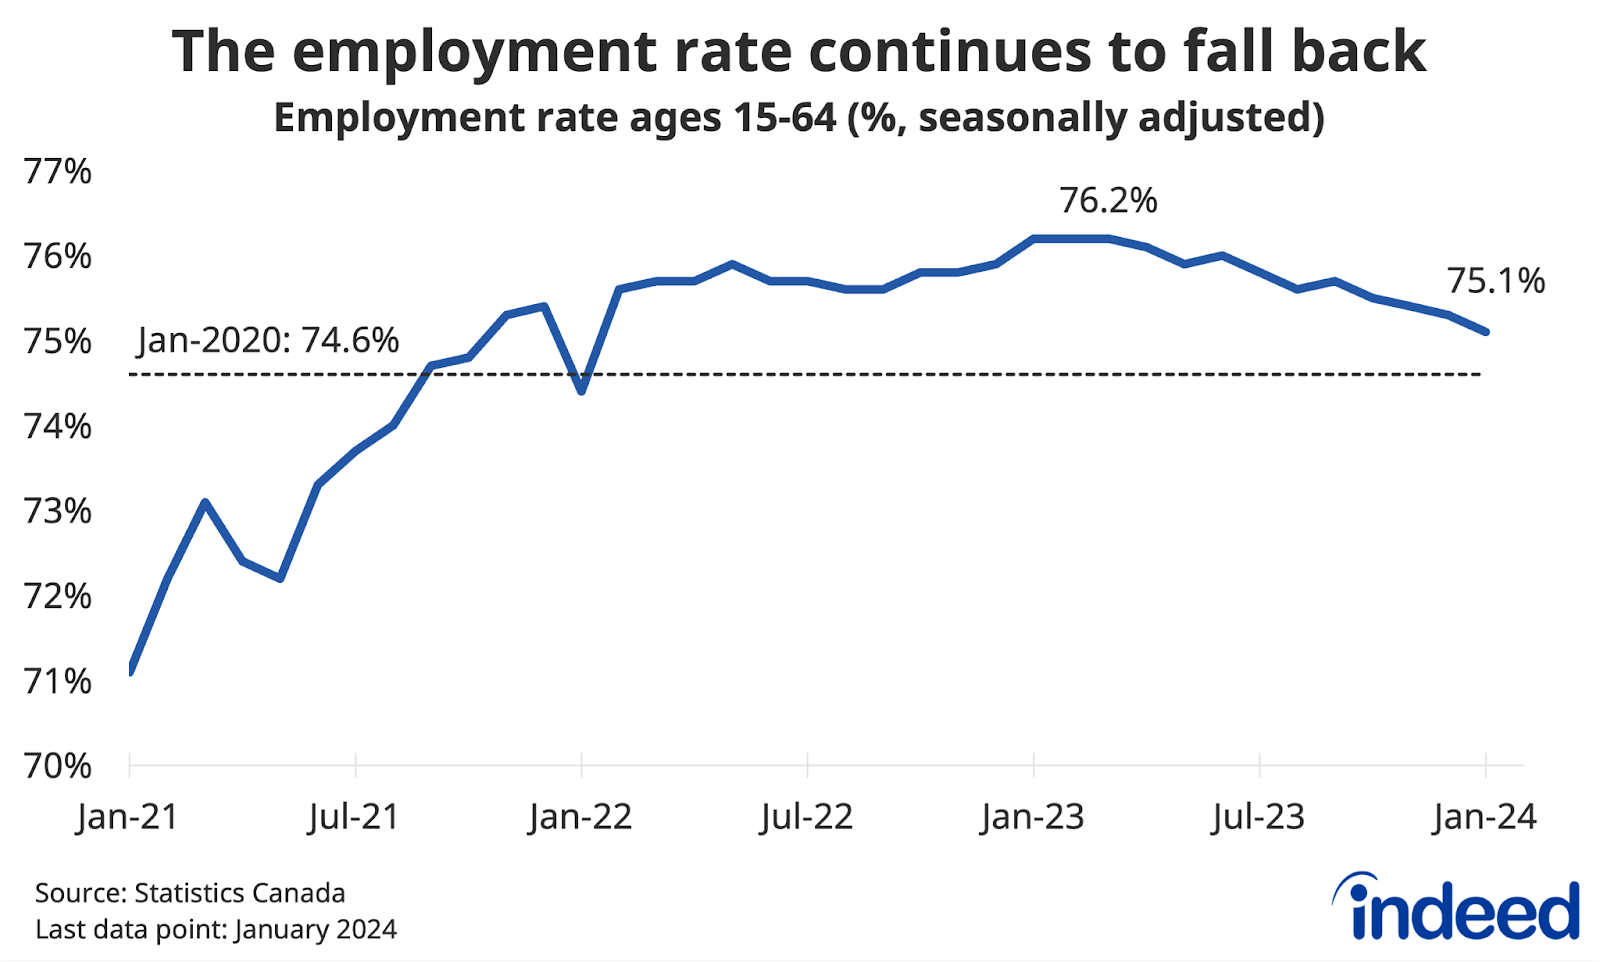 Line chart titled “The employment rate continues to fall back” shows the share of Canadians aged 15-64 with a job between January 2021 and January 2024. The current working-age employment rate stands at 75.1%, down from 76.2% earlier in 2023, though still up from its pre-pandemic 74.6% level. 